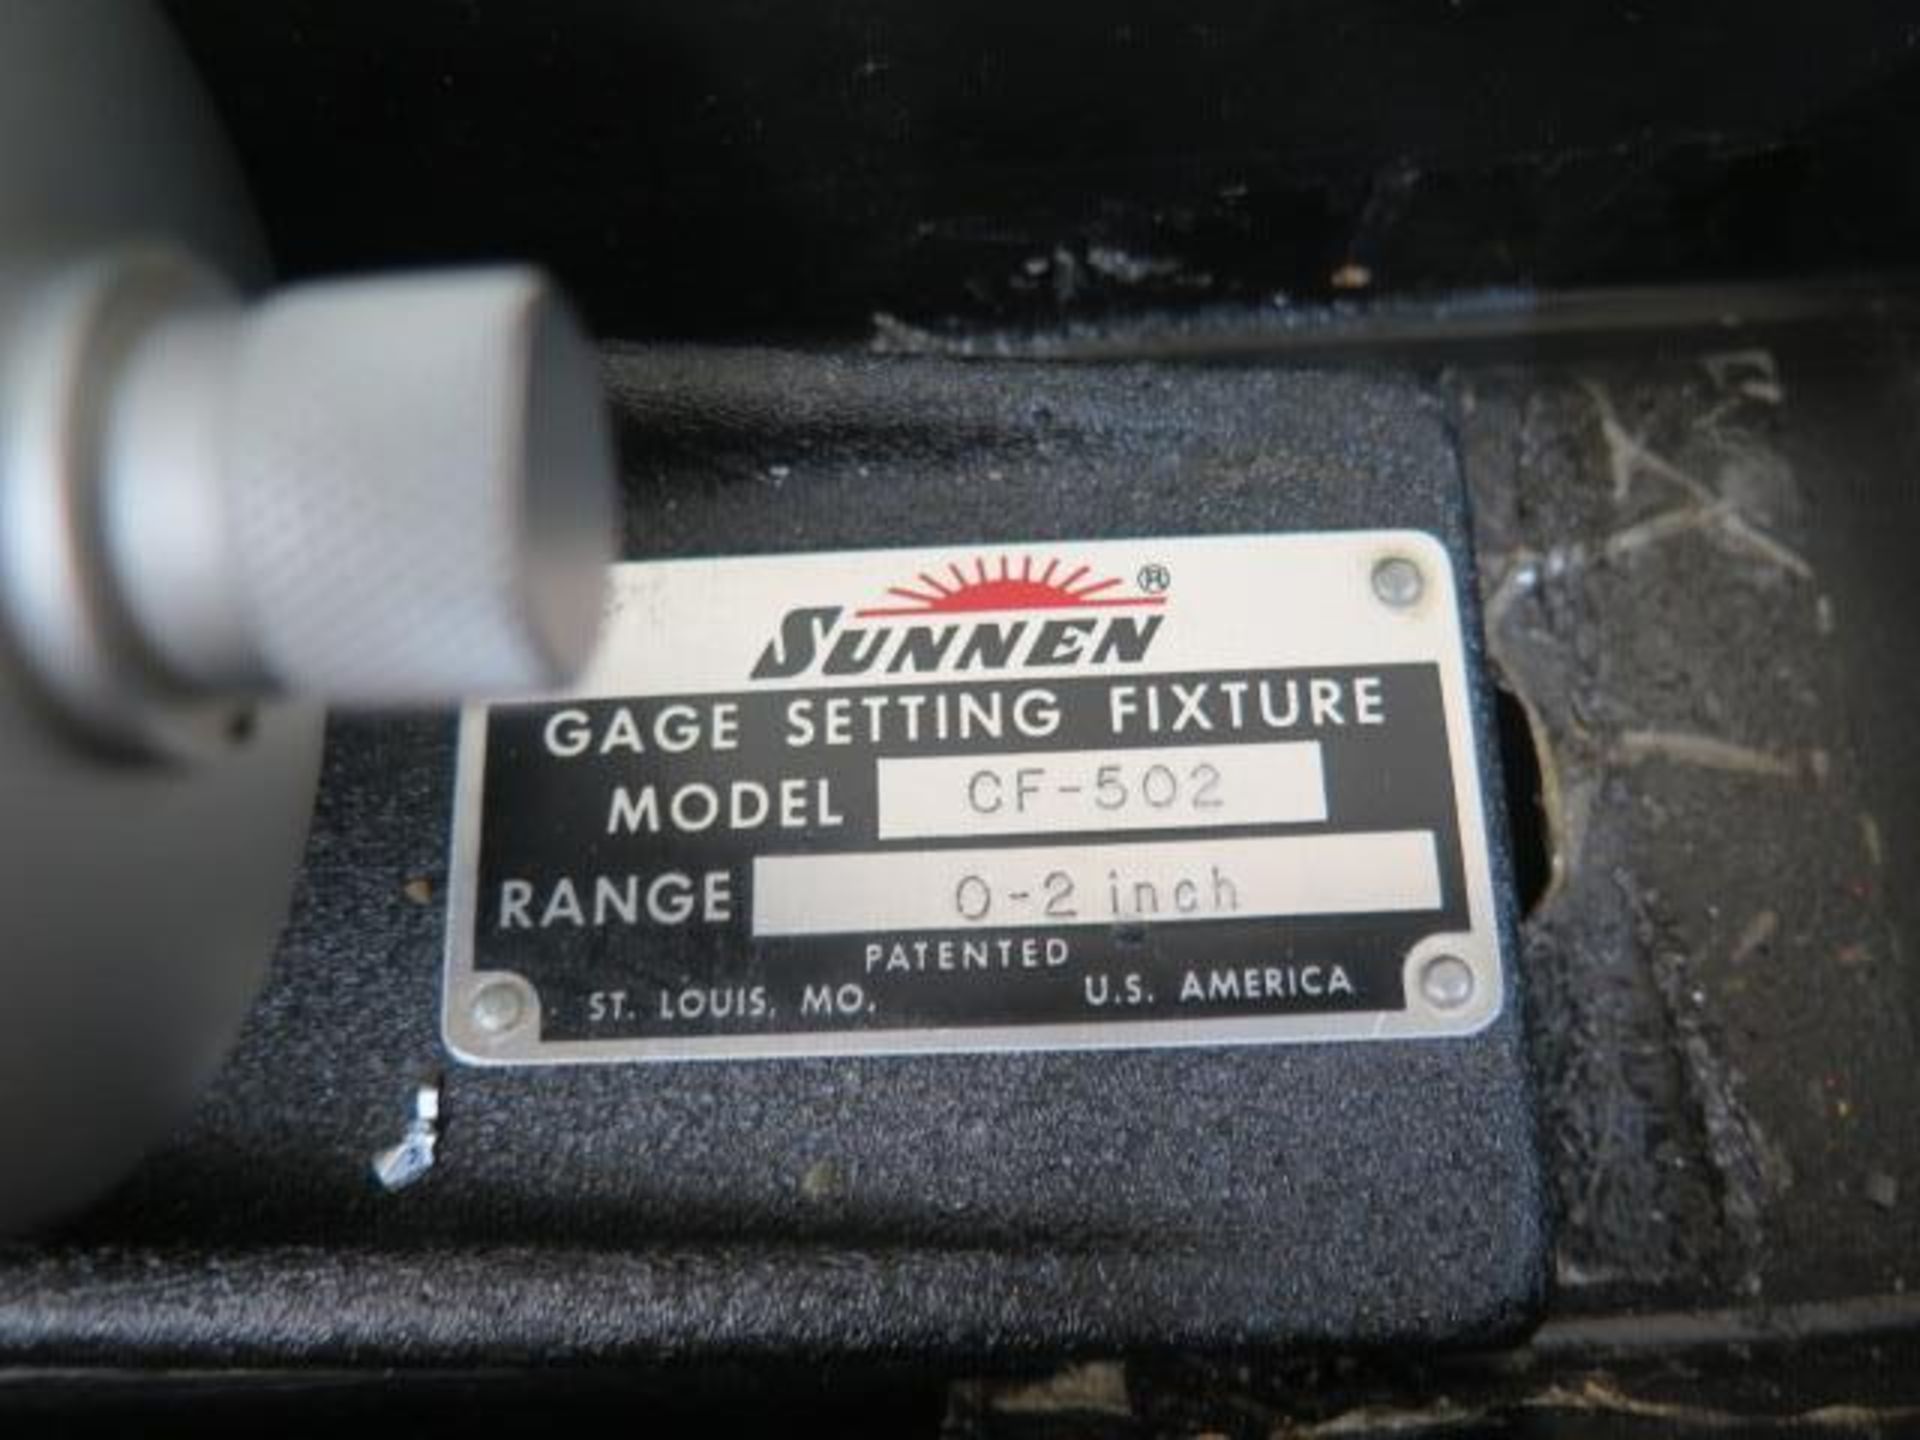 Sunnen CF-502 0-2” Bore Gage Setting Fixture (SOLD AS-IS - NO WARRANTY) - Image 7 of 7